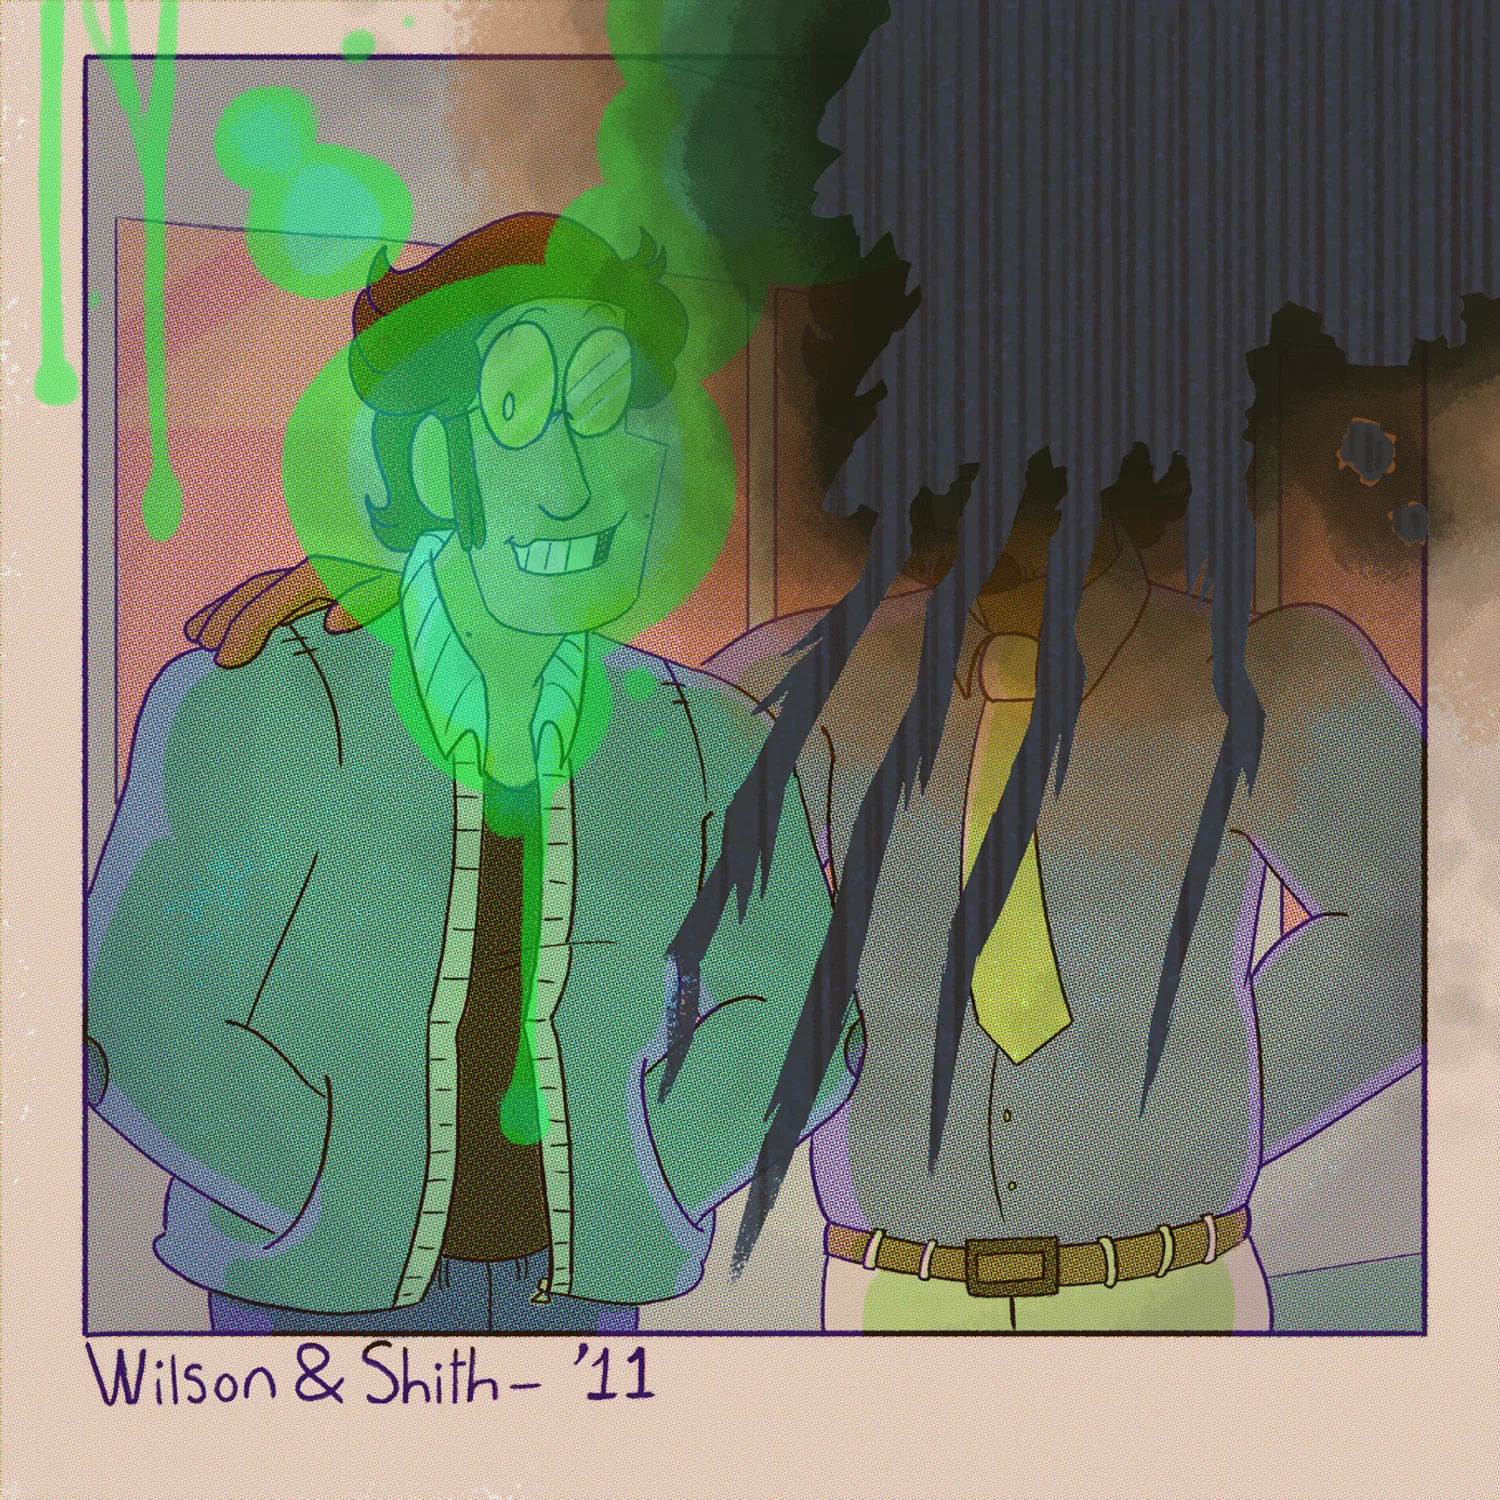 Digital illustration of a destroyed polaroid of two men- left of the photo is soaked in a green substance while the right of the image is burnt, obscuring the man on the right's face